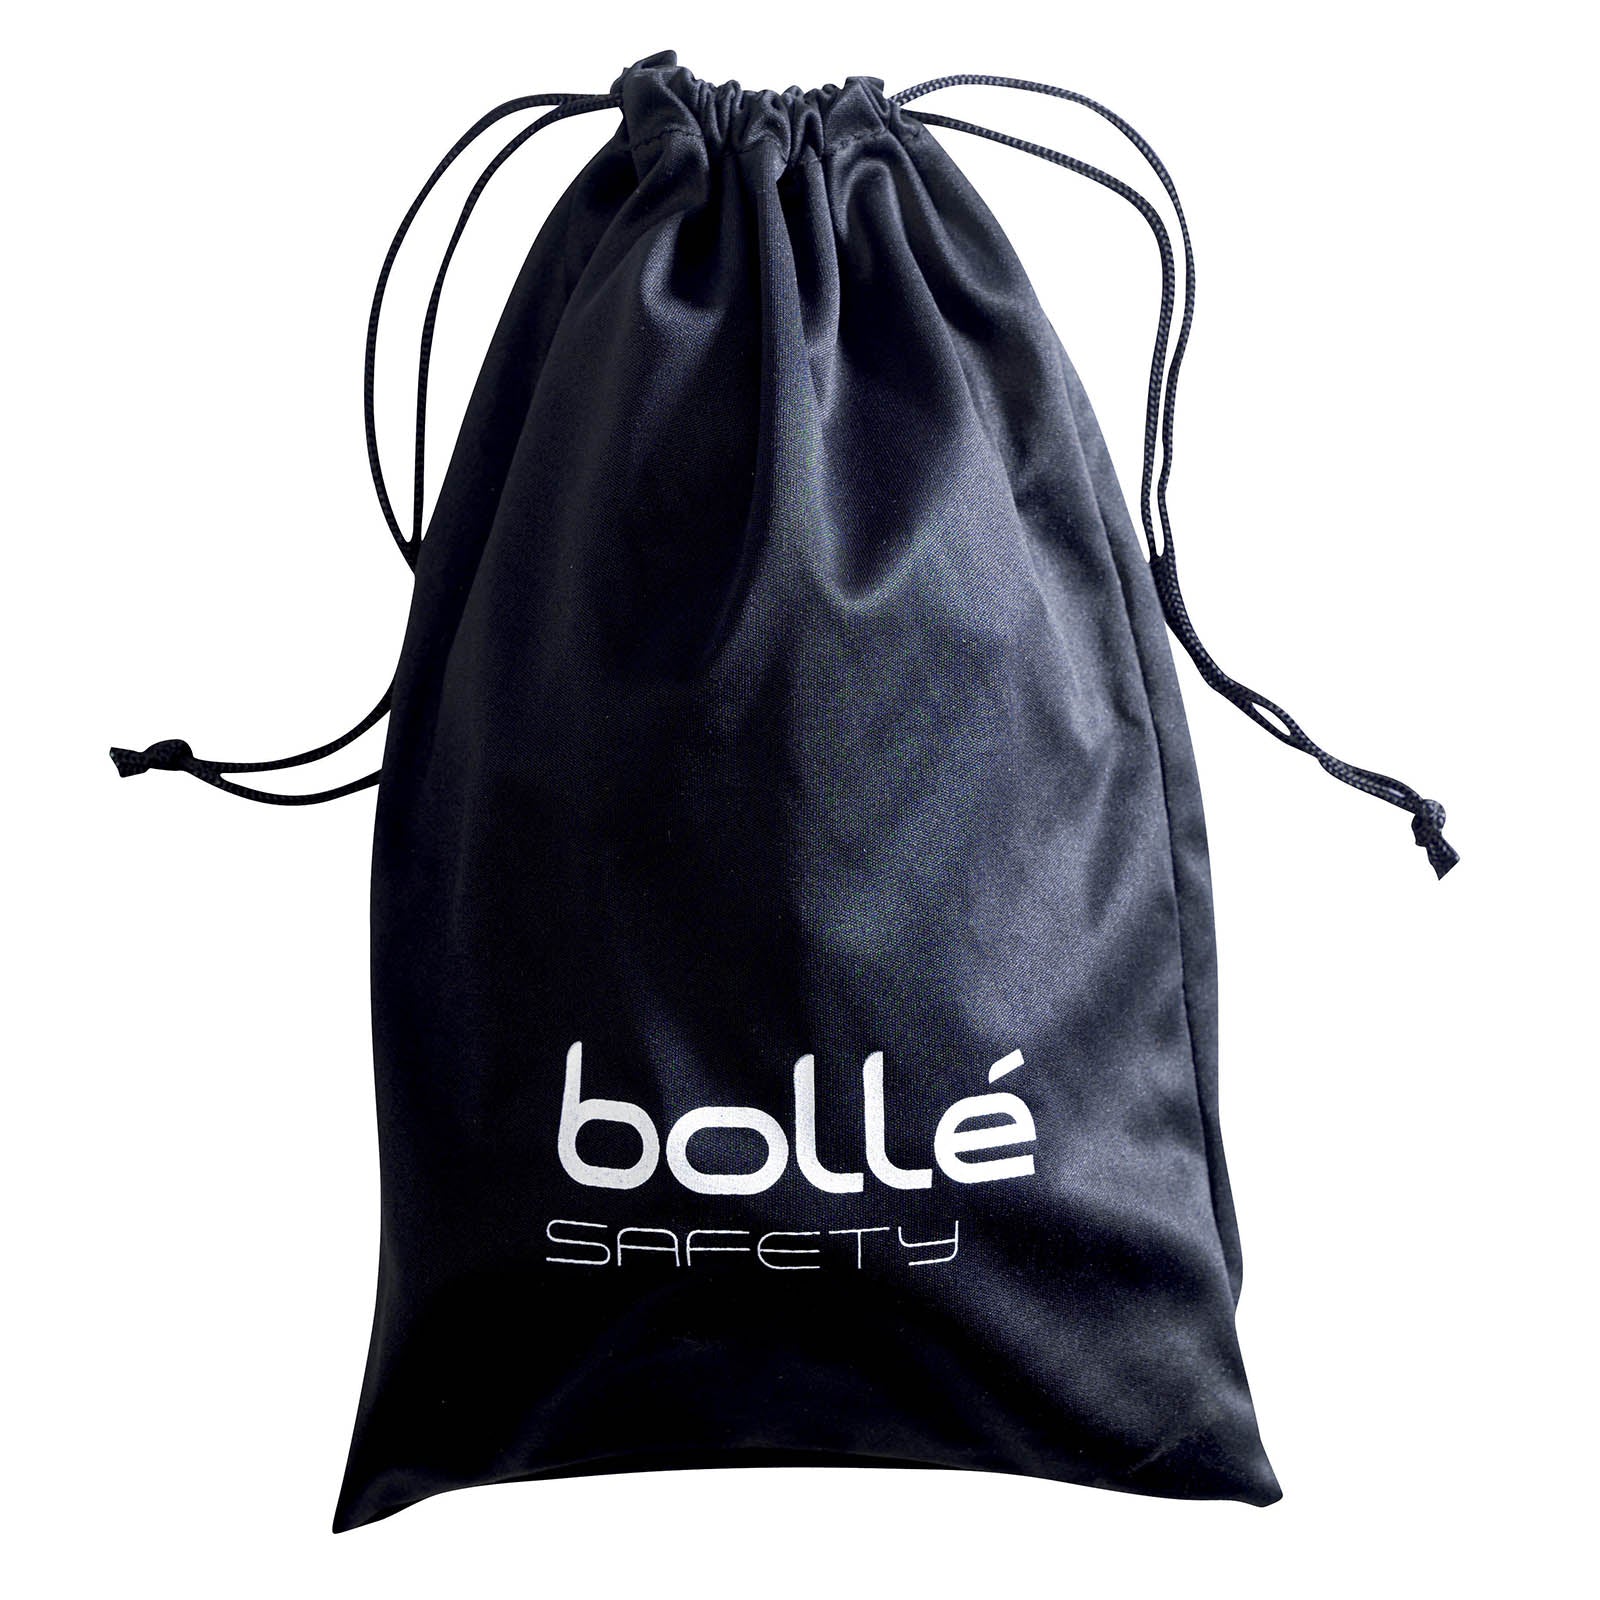 Bolle Safety Goggle Microfibre Bag ETUIFL